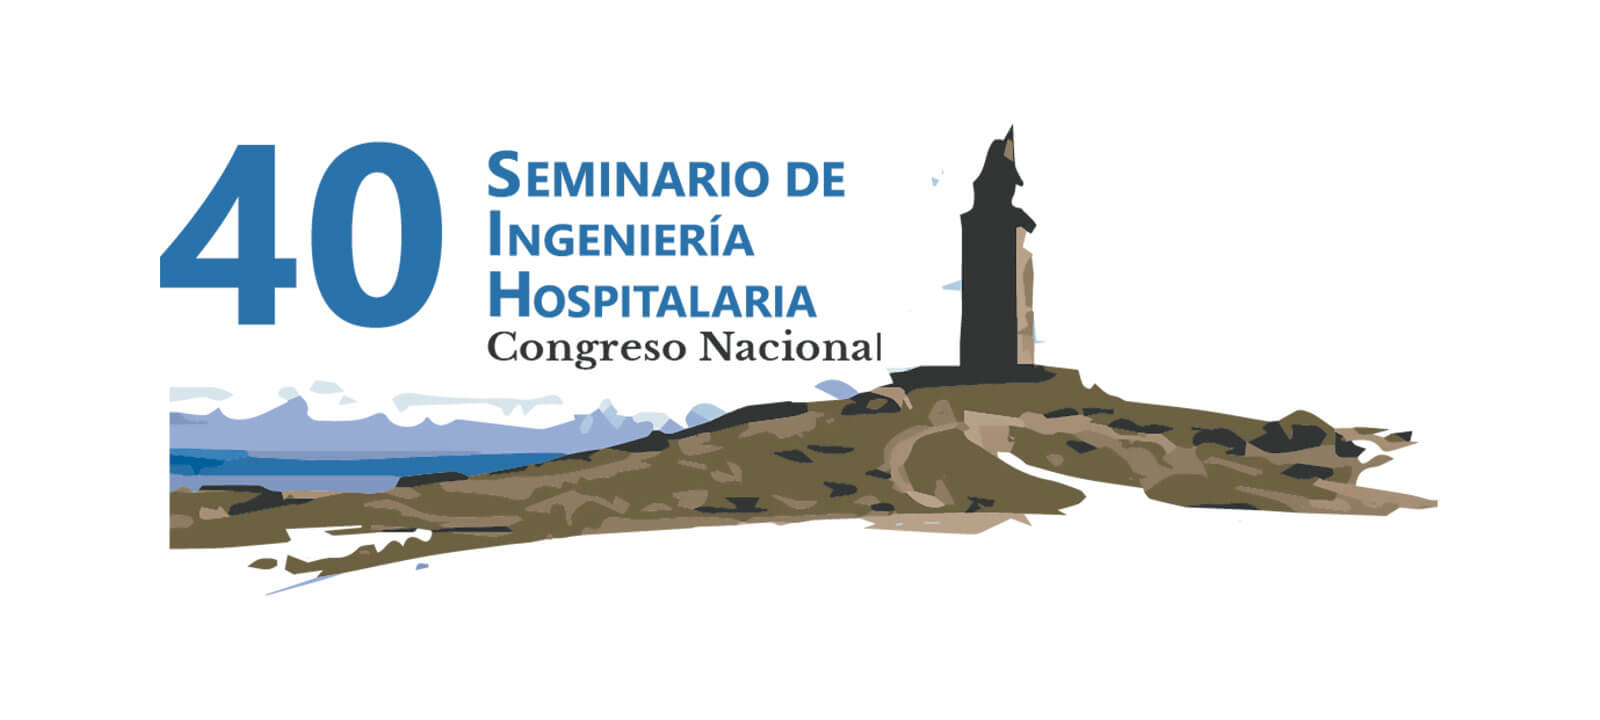 On October 4, 5 and 6, the 40th Hospital Engineering Seminar - National Congress will be held in A Coruña